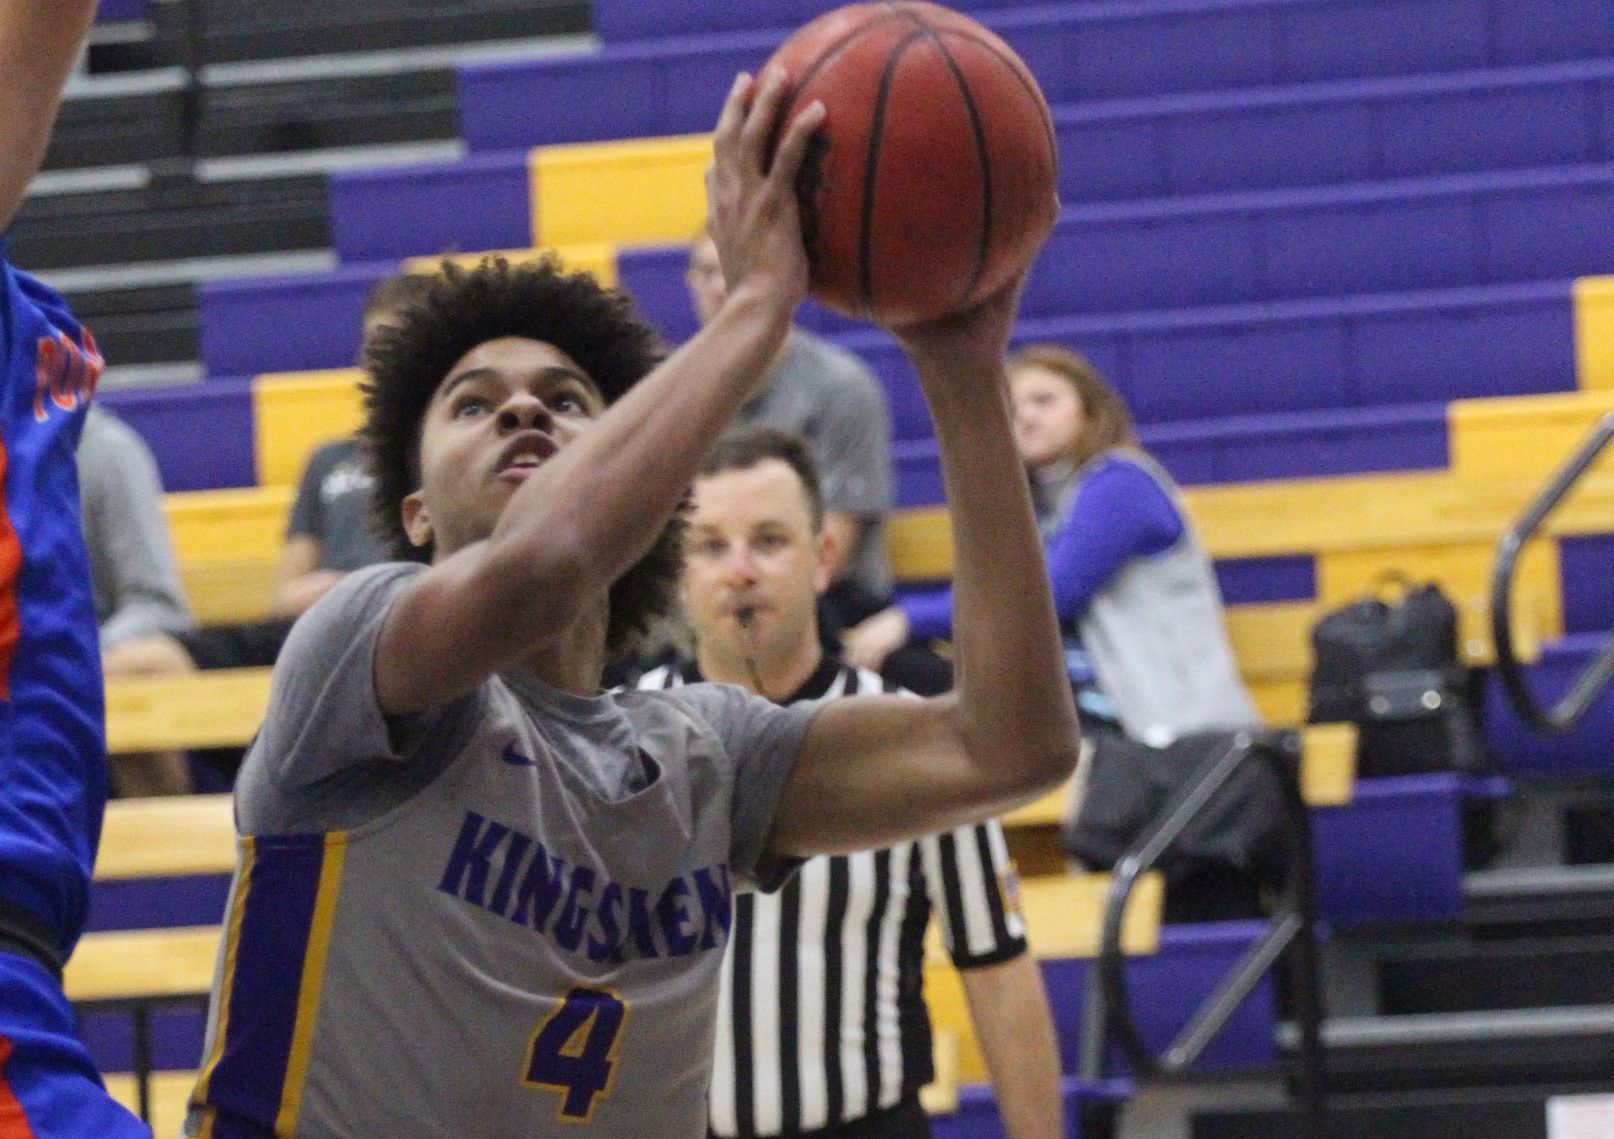 Thomas Notches Double-Digit Points for Sixth Straight Game; Kingsmen Fall to Falcons